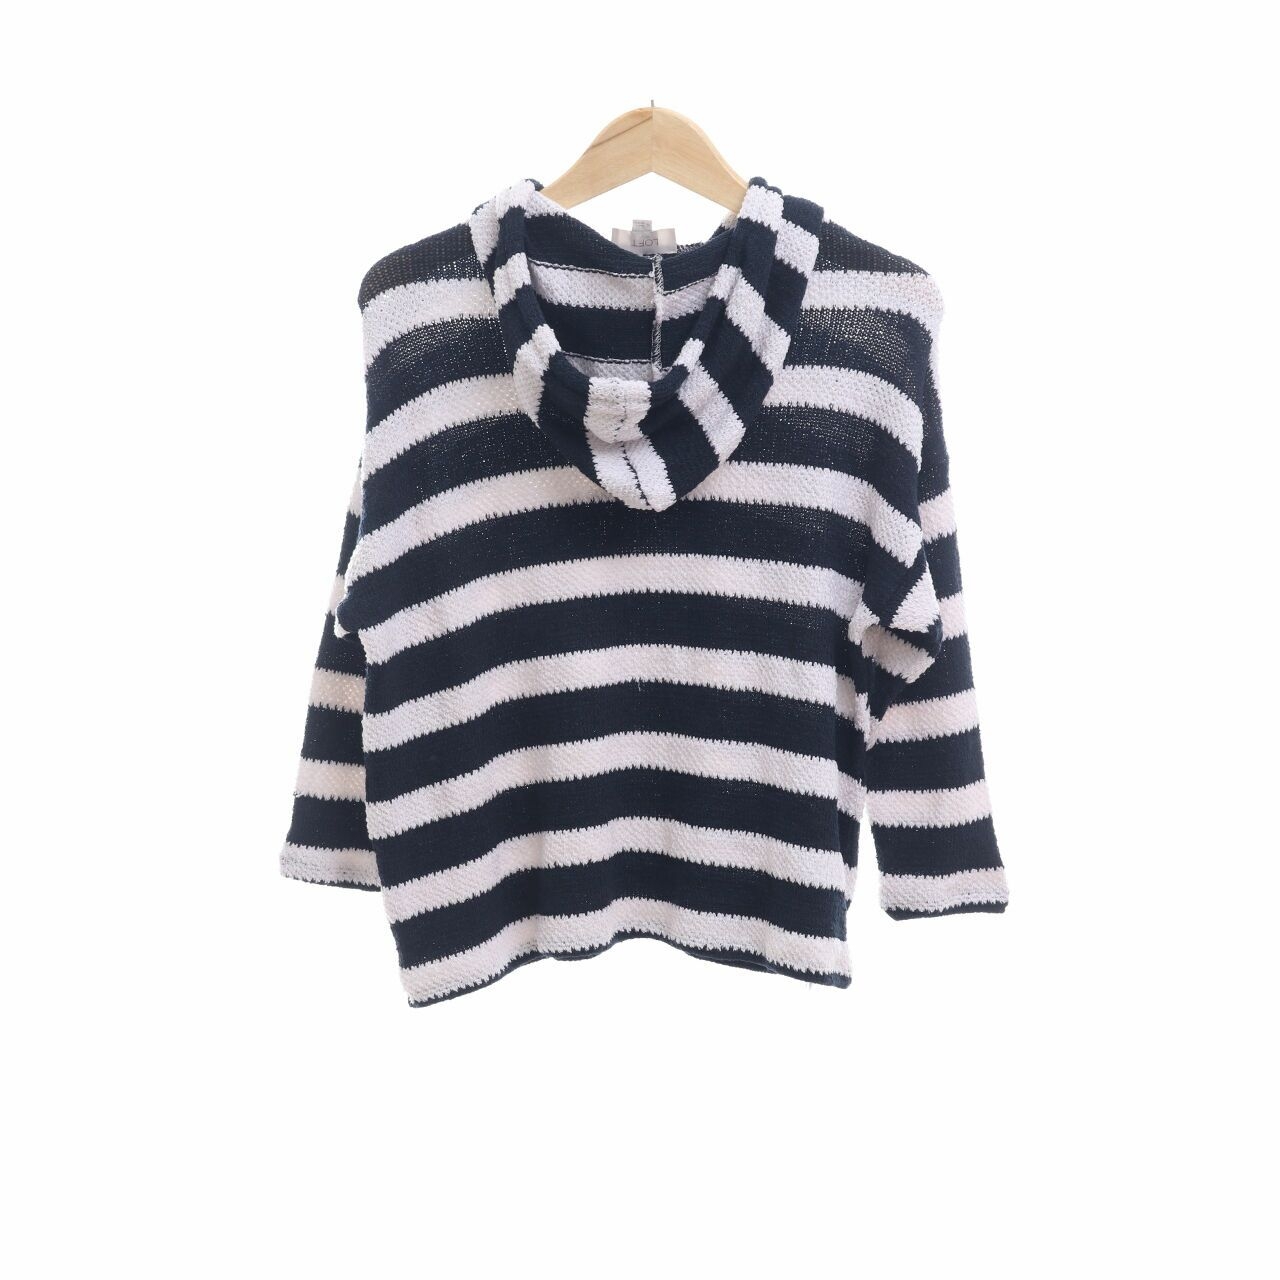 Loft Outlet Navy Stripes Hoodie Sweater